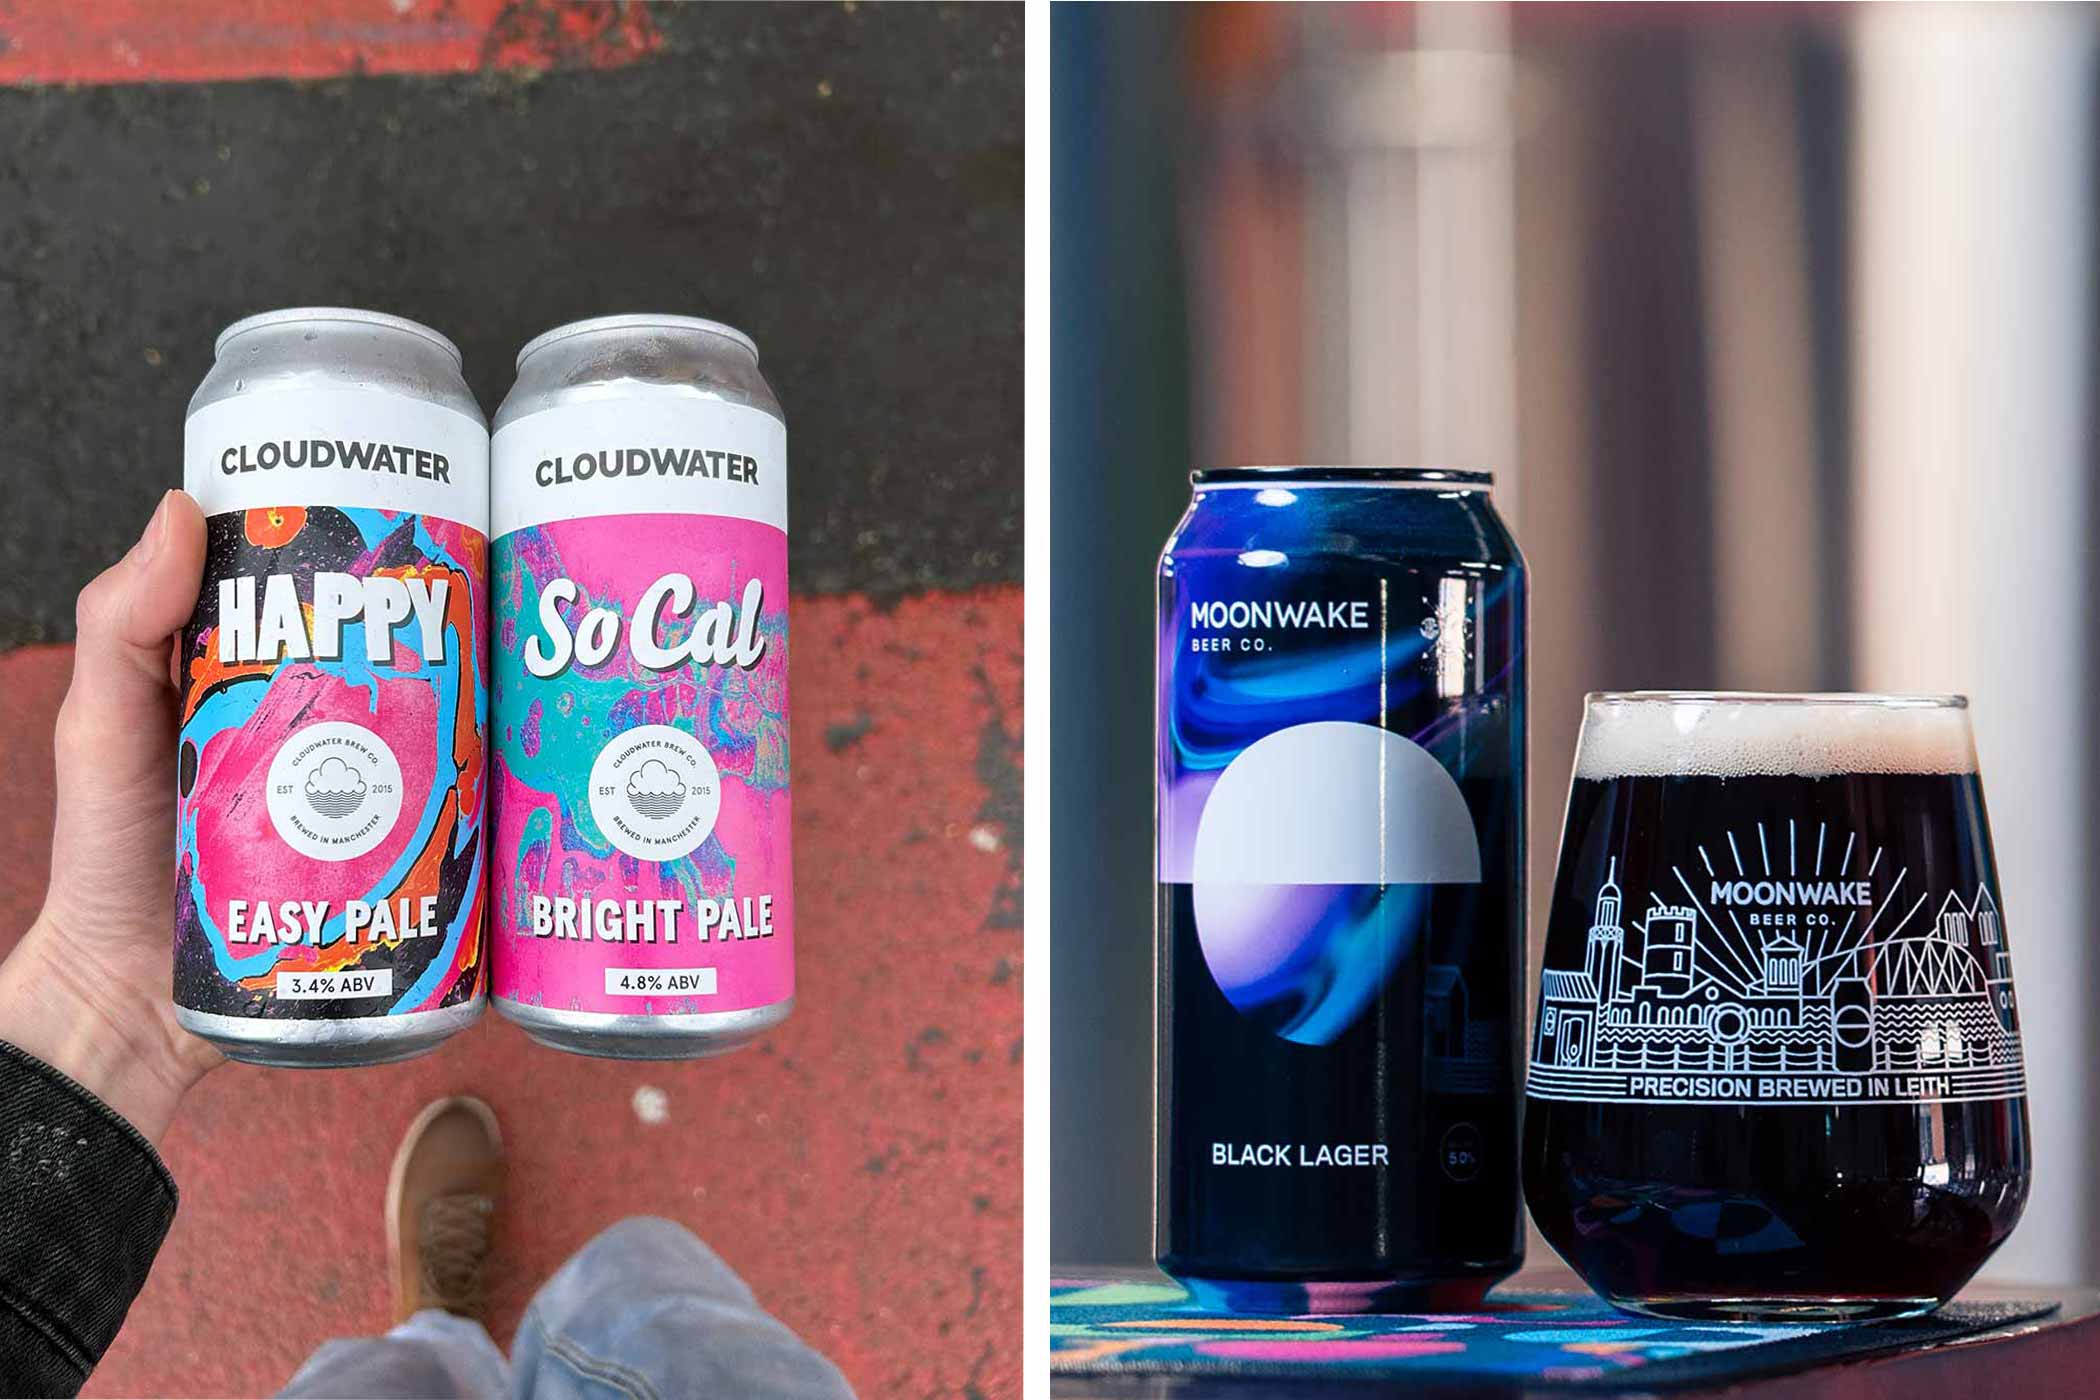 The Top 12 Beers We Drank in May